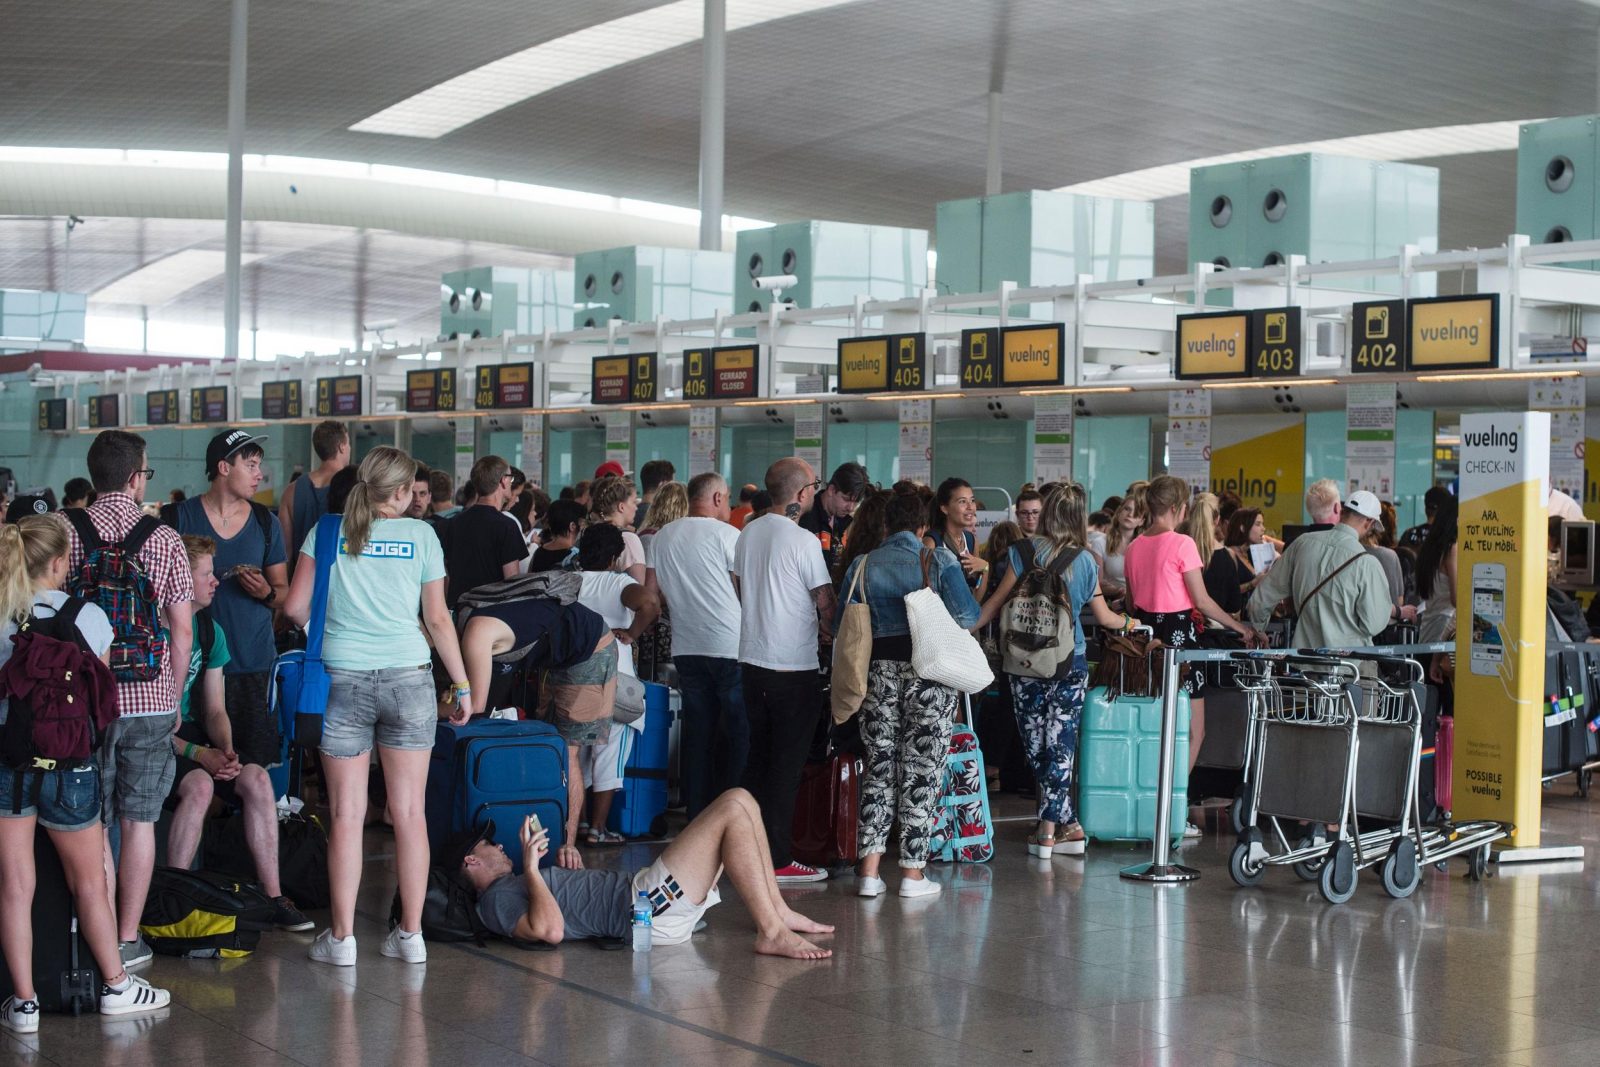 How And Why Are Airlines Making their Passengers Miserable on Purpose